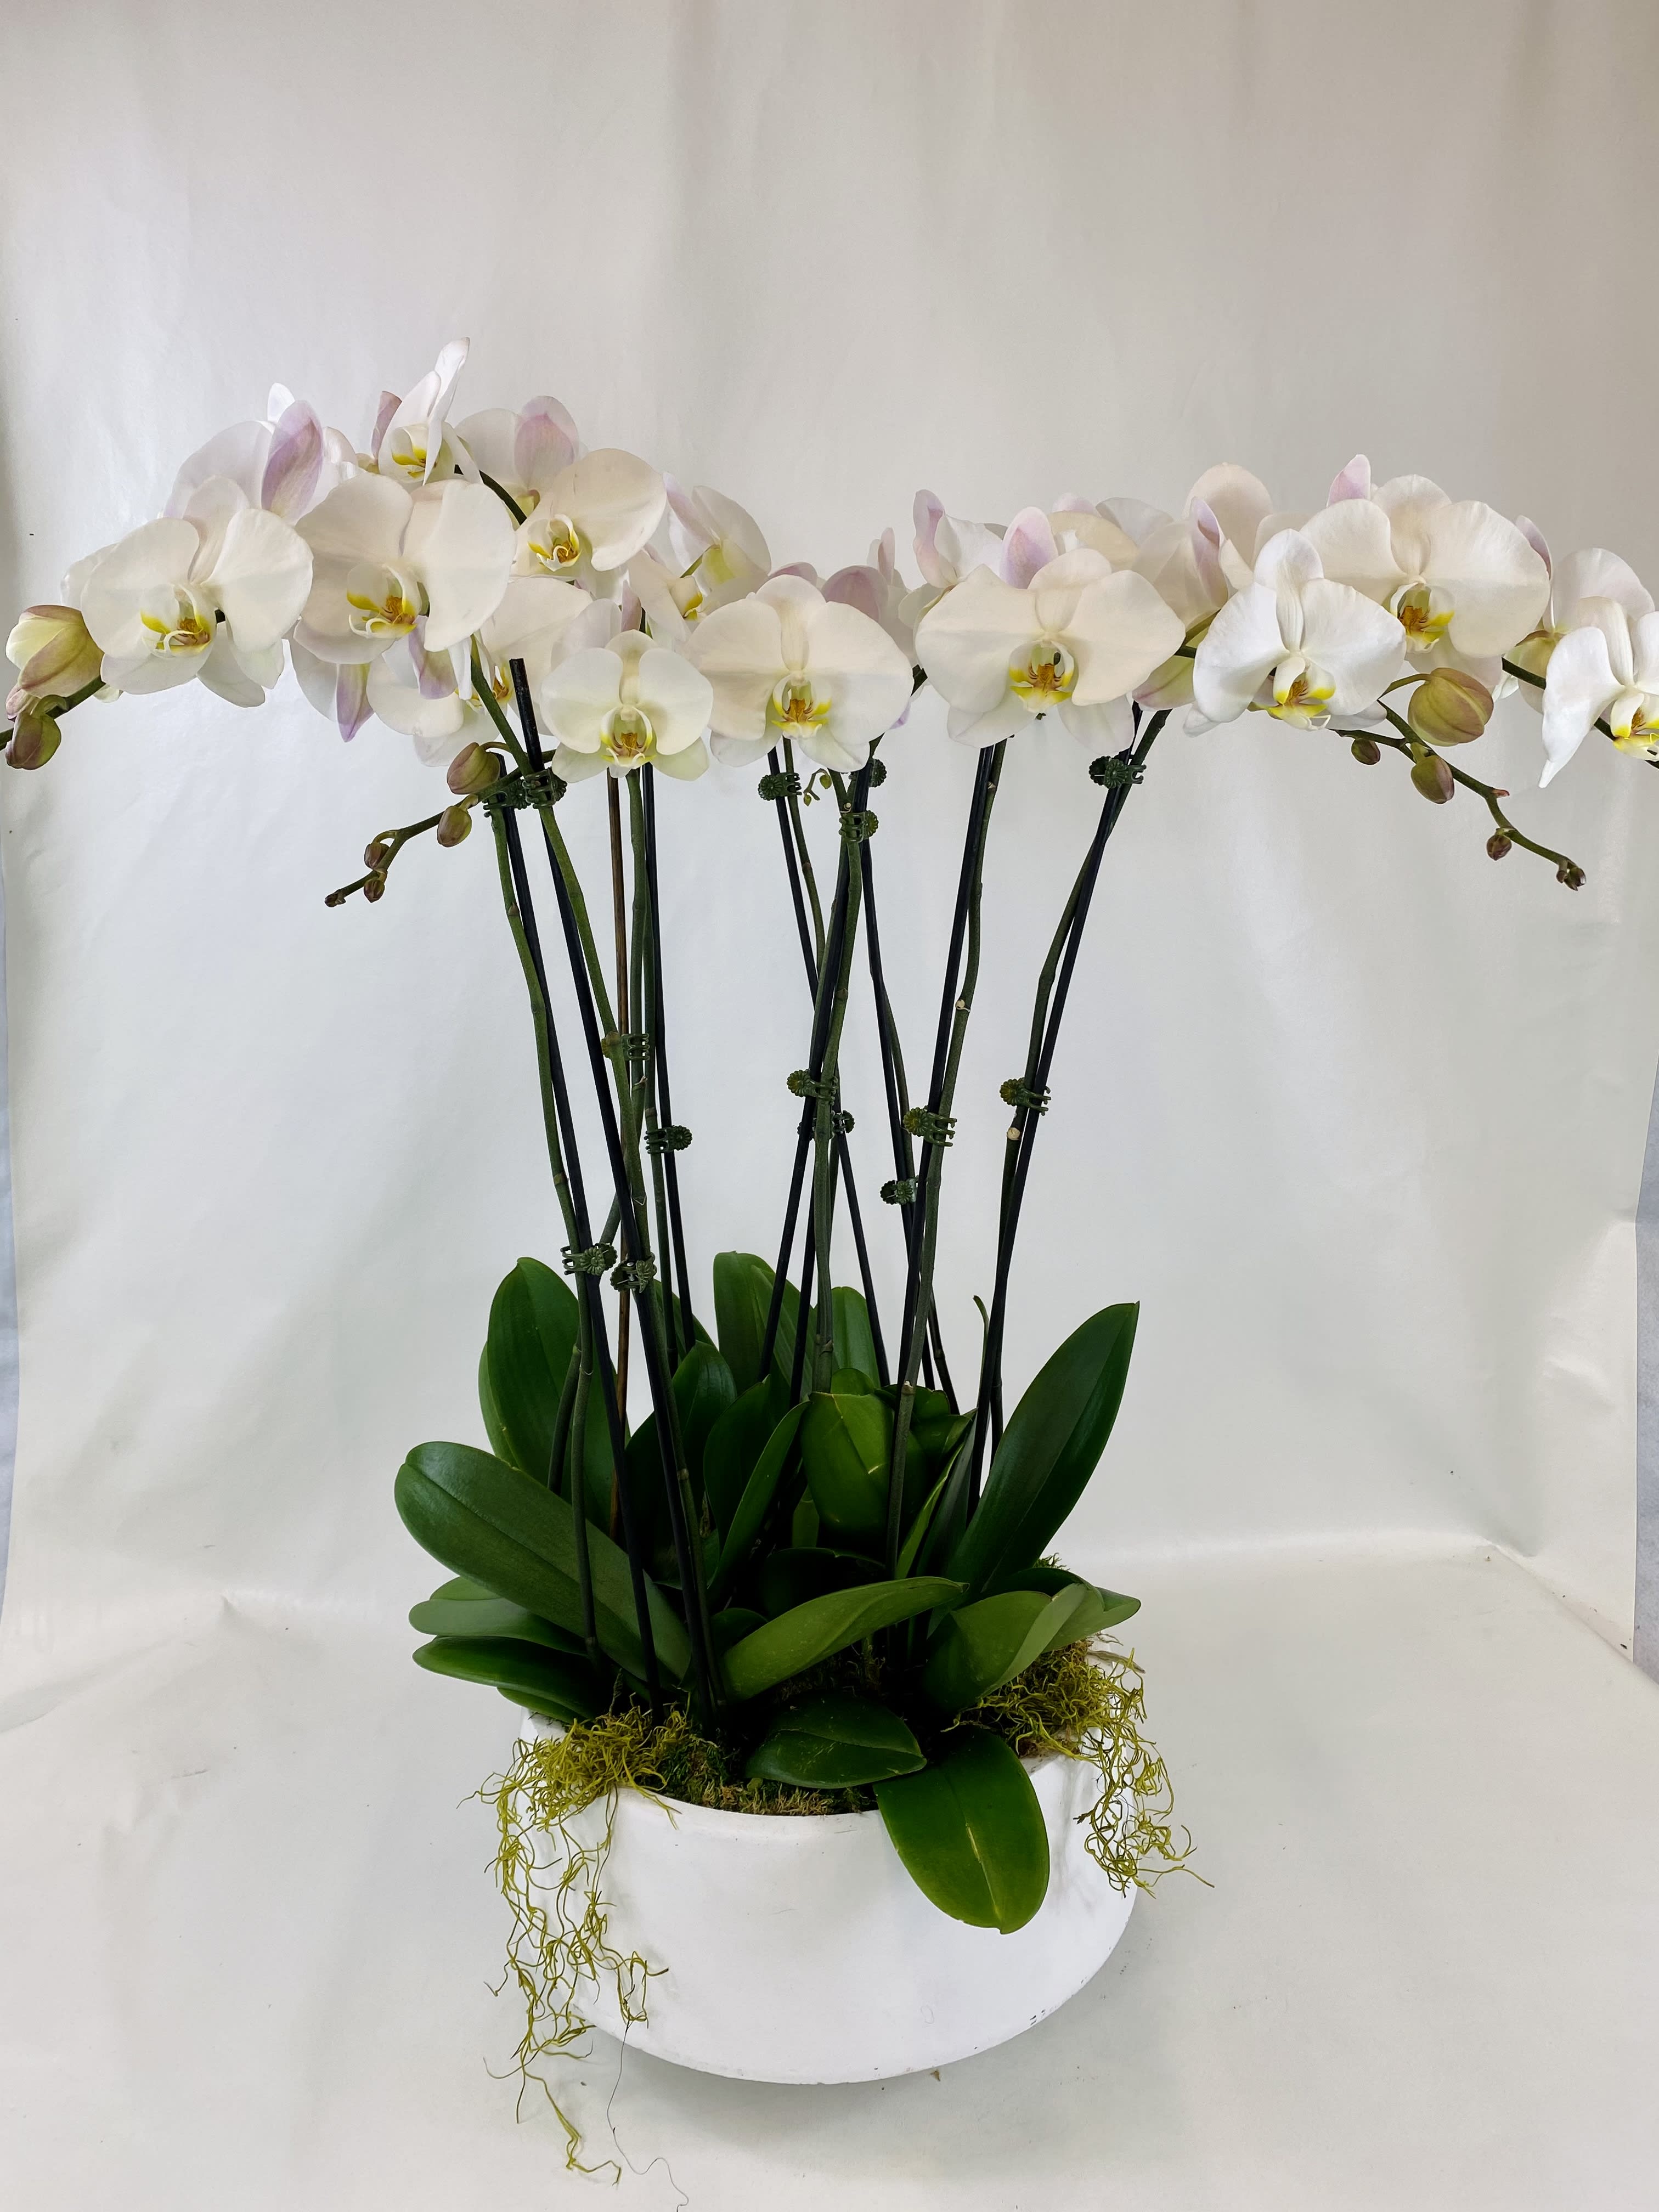 Majestic Orchids  - Super elegant 5 tall double white orchids plants in a large white pot.